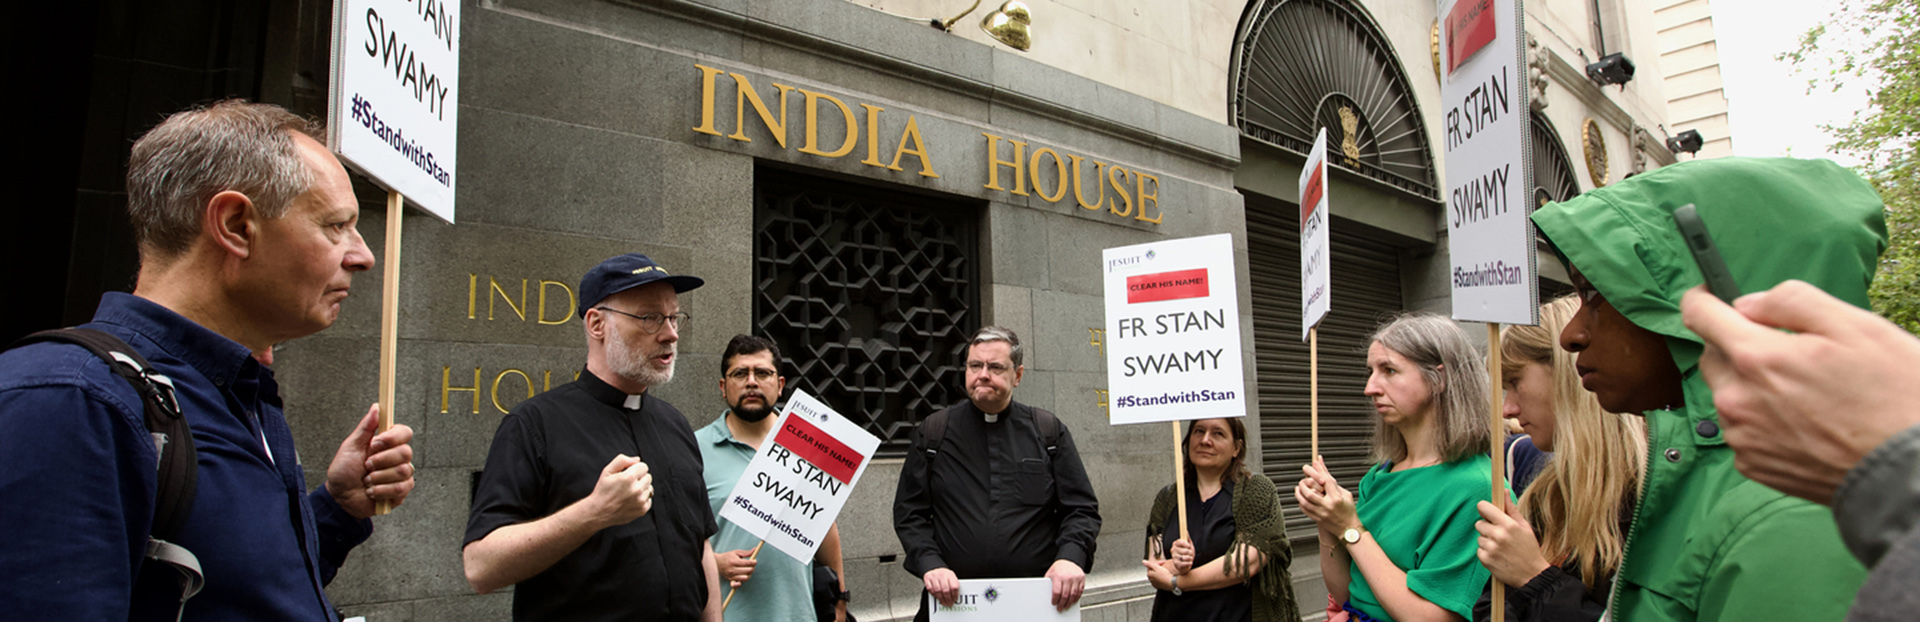 Global – Vigil for Stan Swamy before his Second Death Anniversary